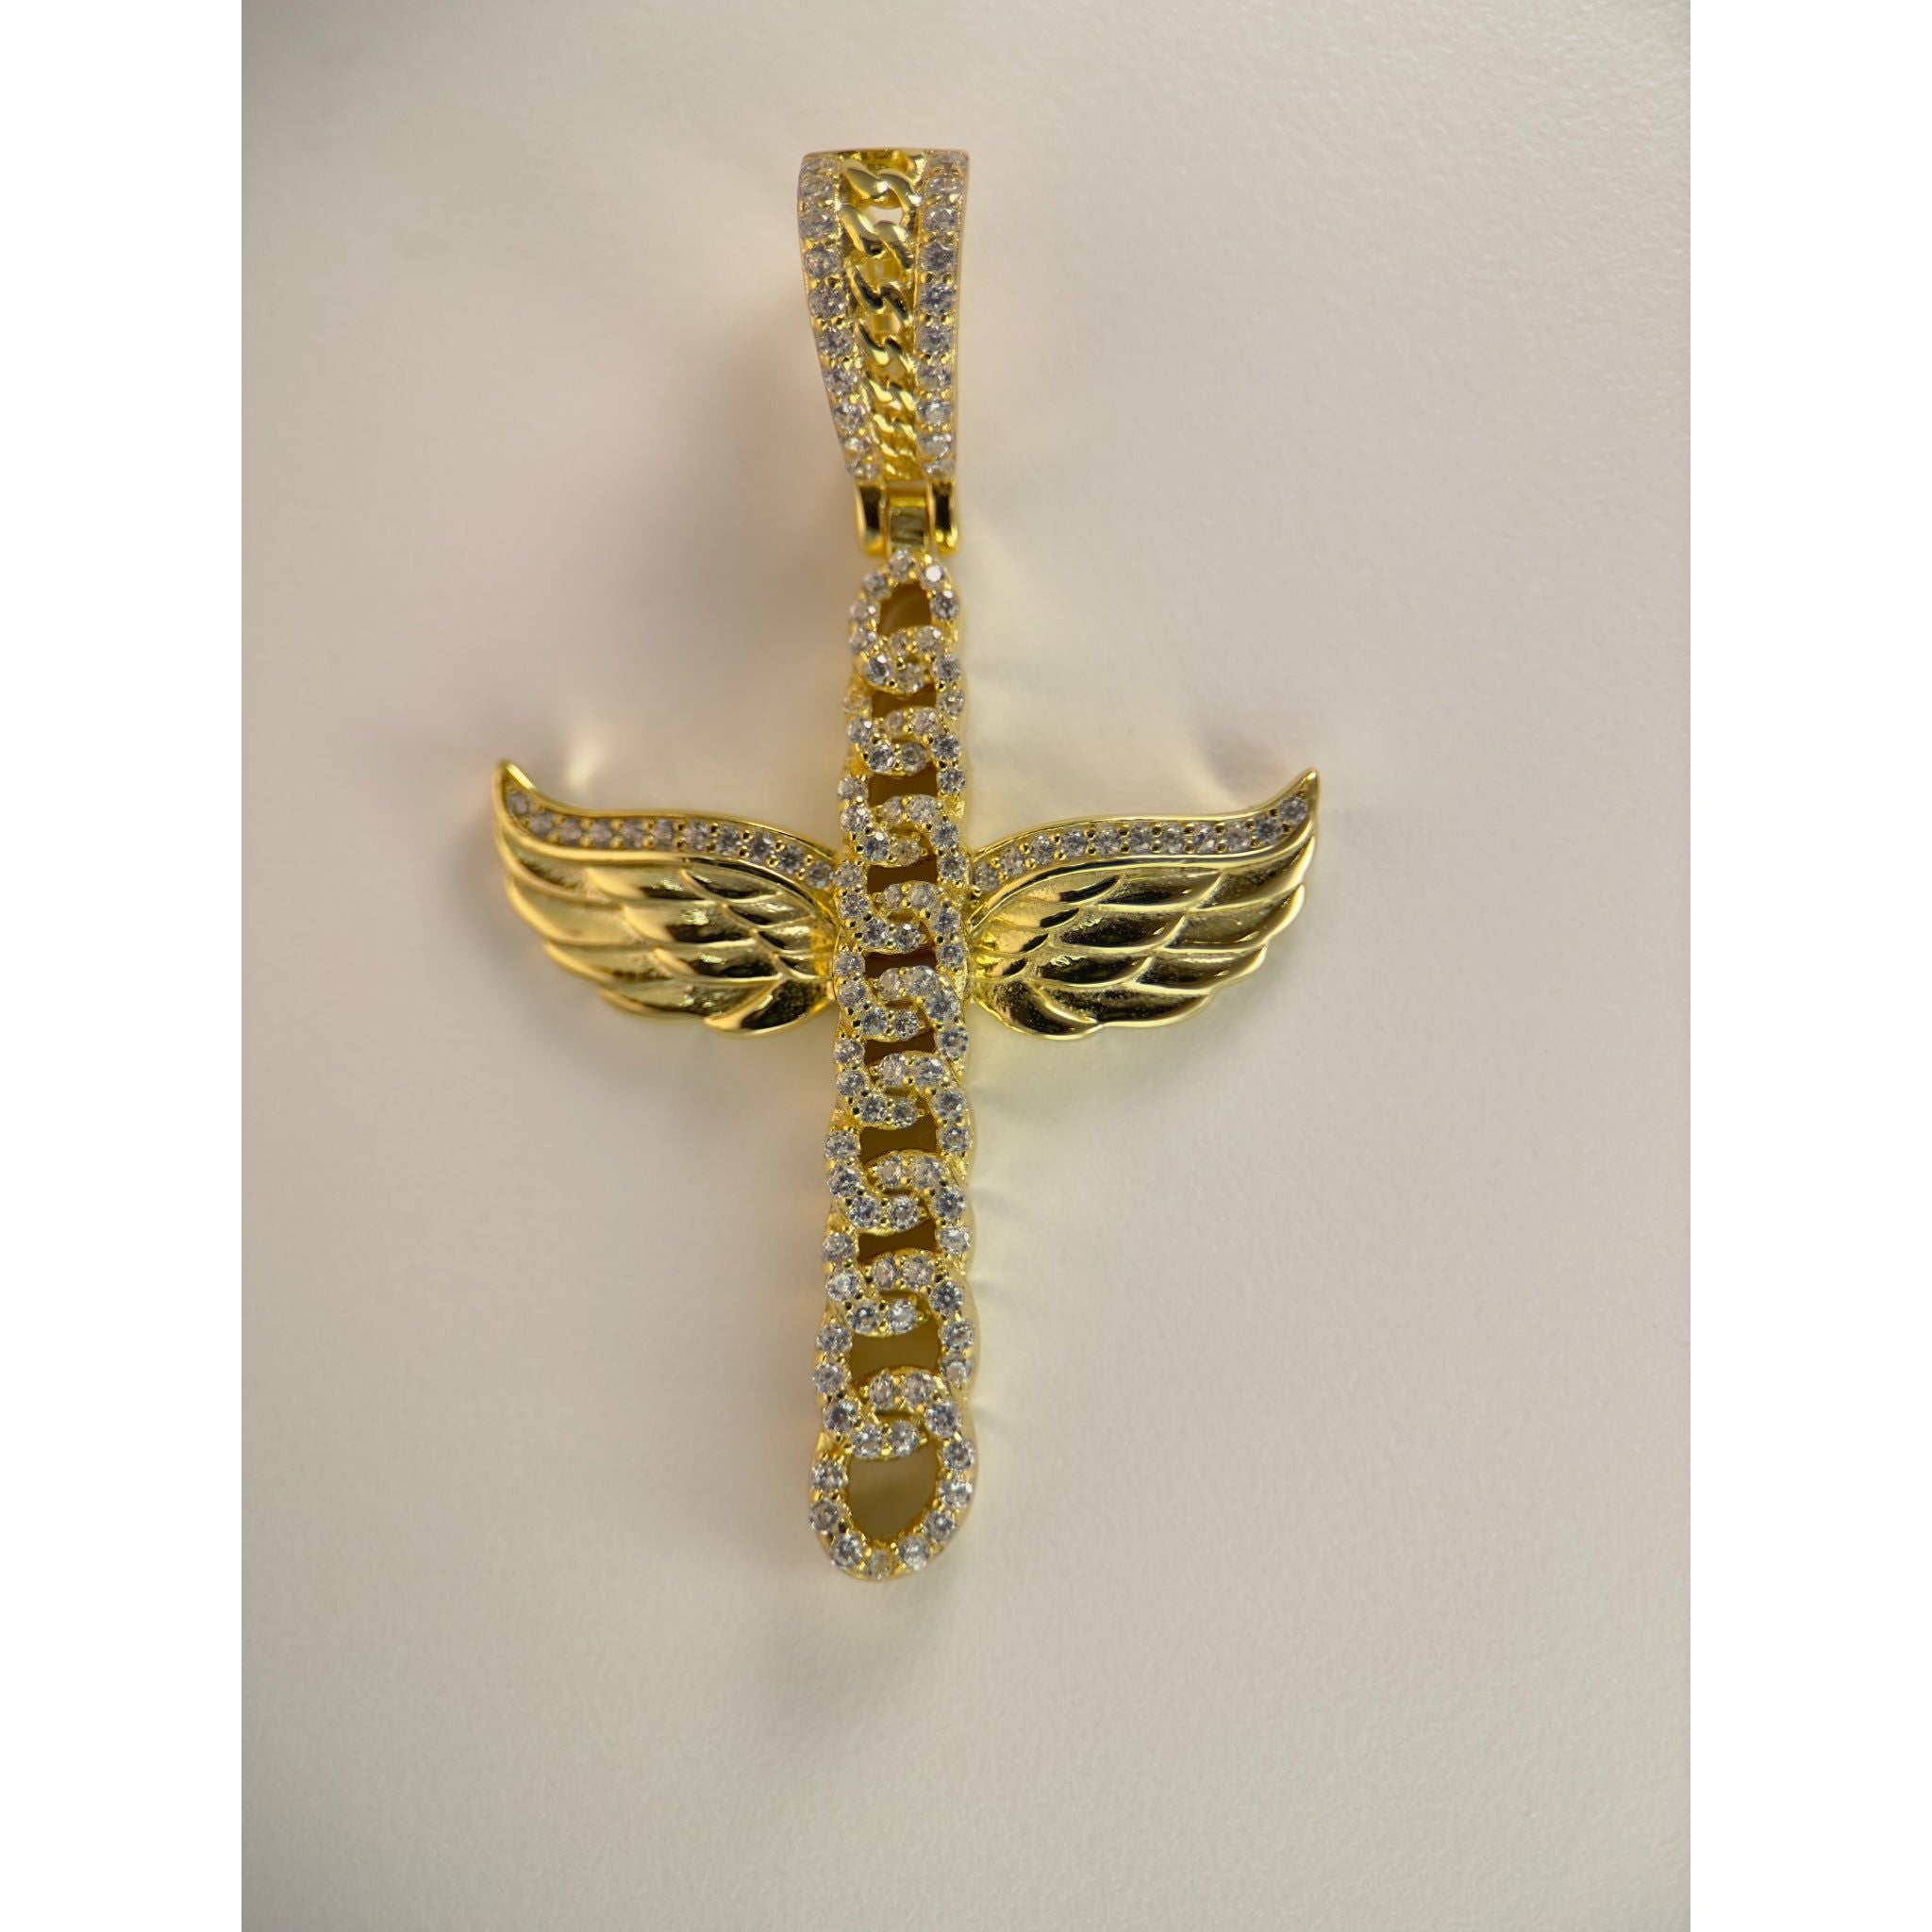 DR3167 - 925 Sterling Silver,14k Gold Bonded - Lab Created Stones - Pendant - Cuban Cross w/Angel Wings